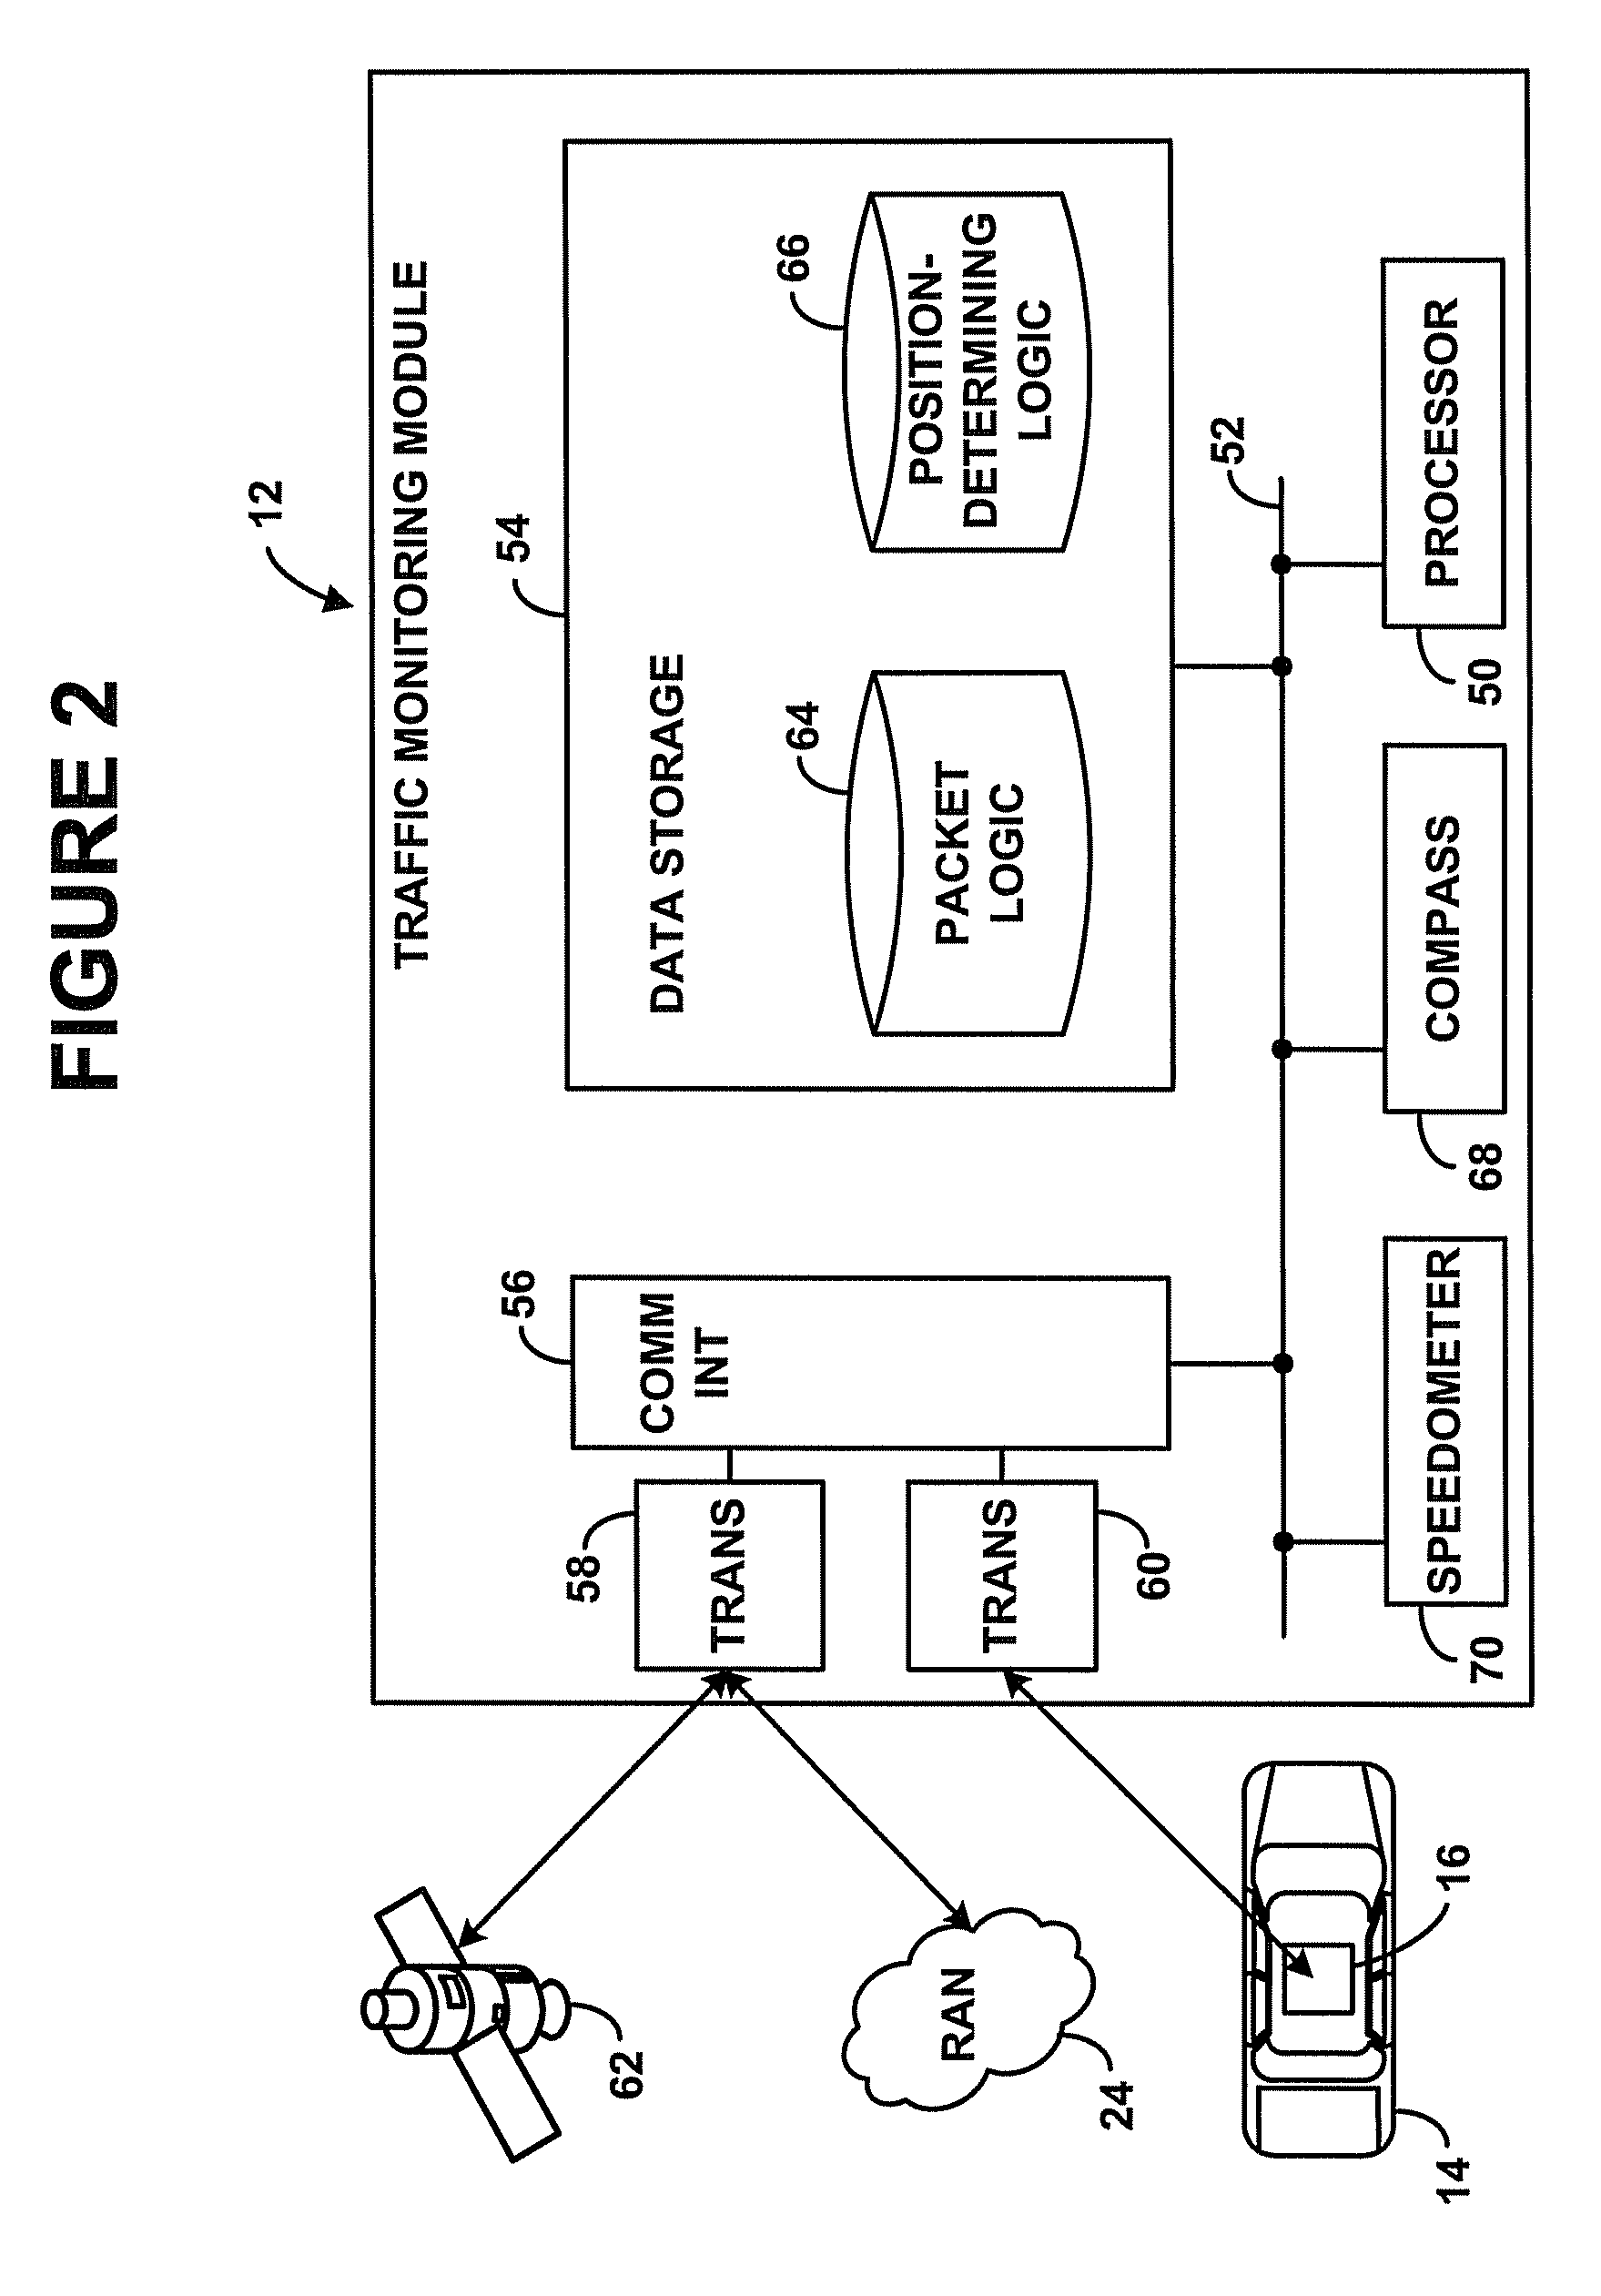 Vehicular traffic congestion monitoring through inter-vehicle communication and traffic chain counter